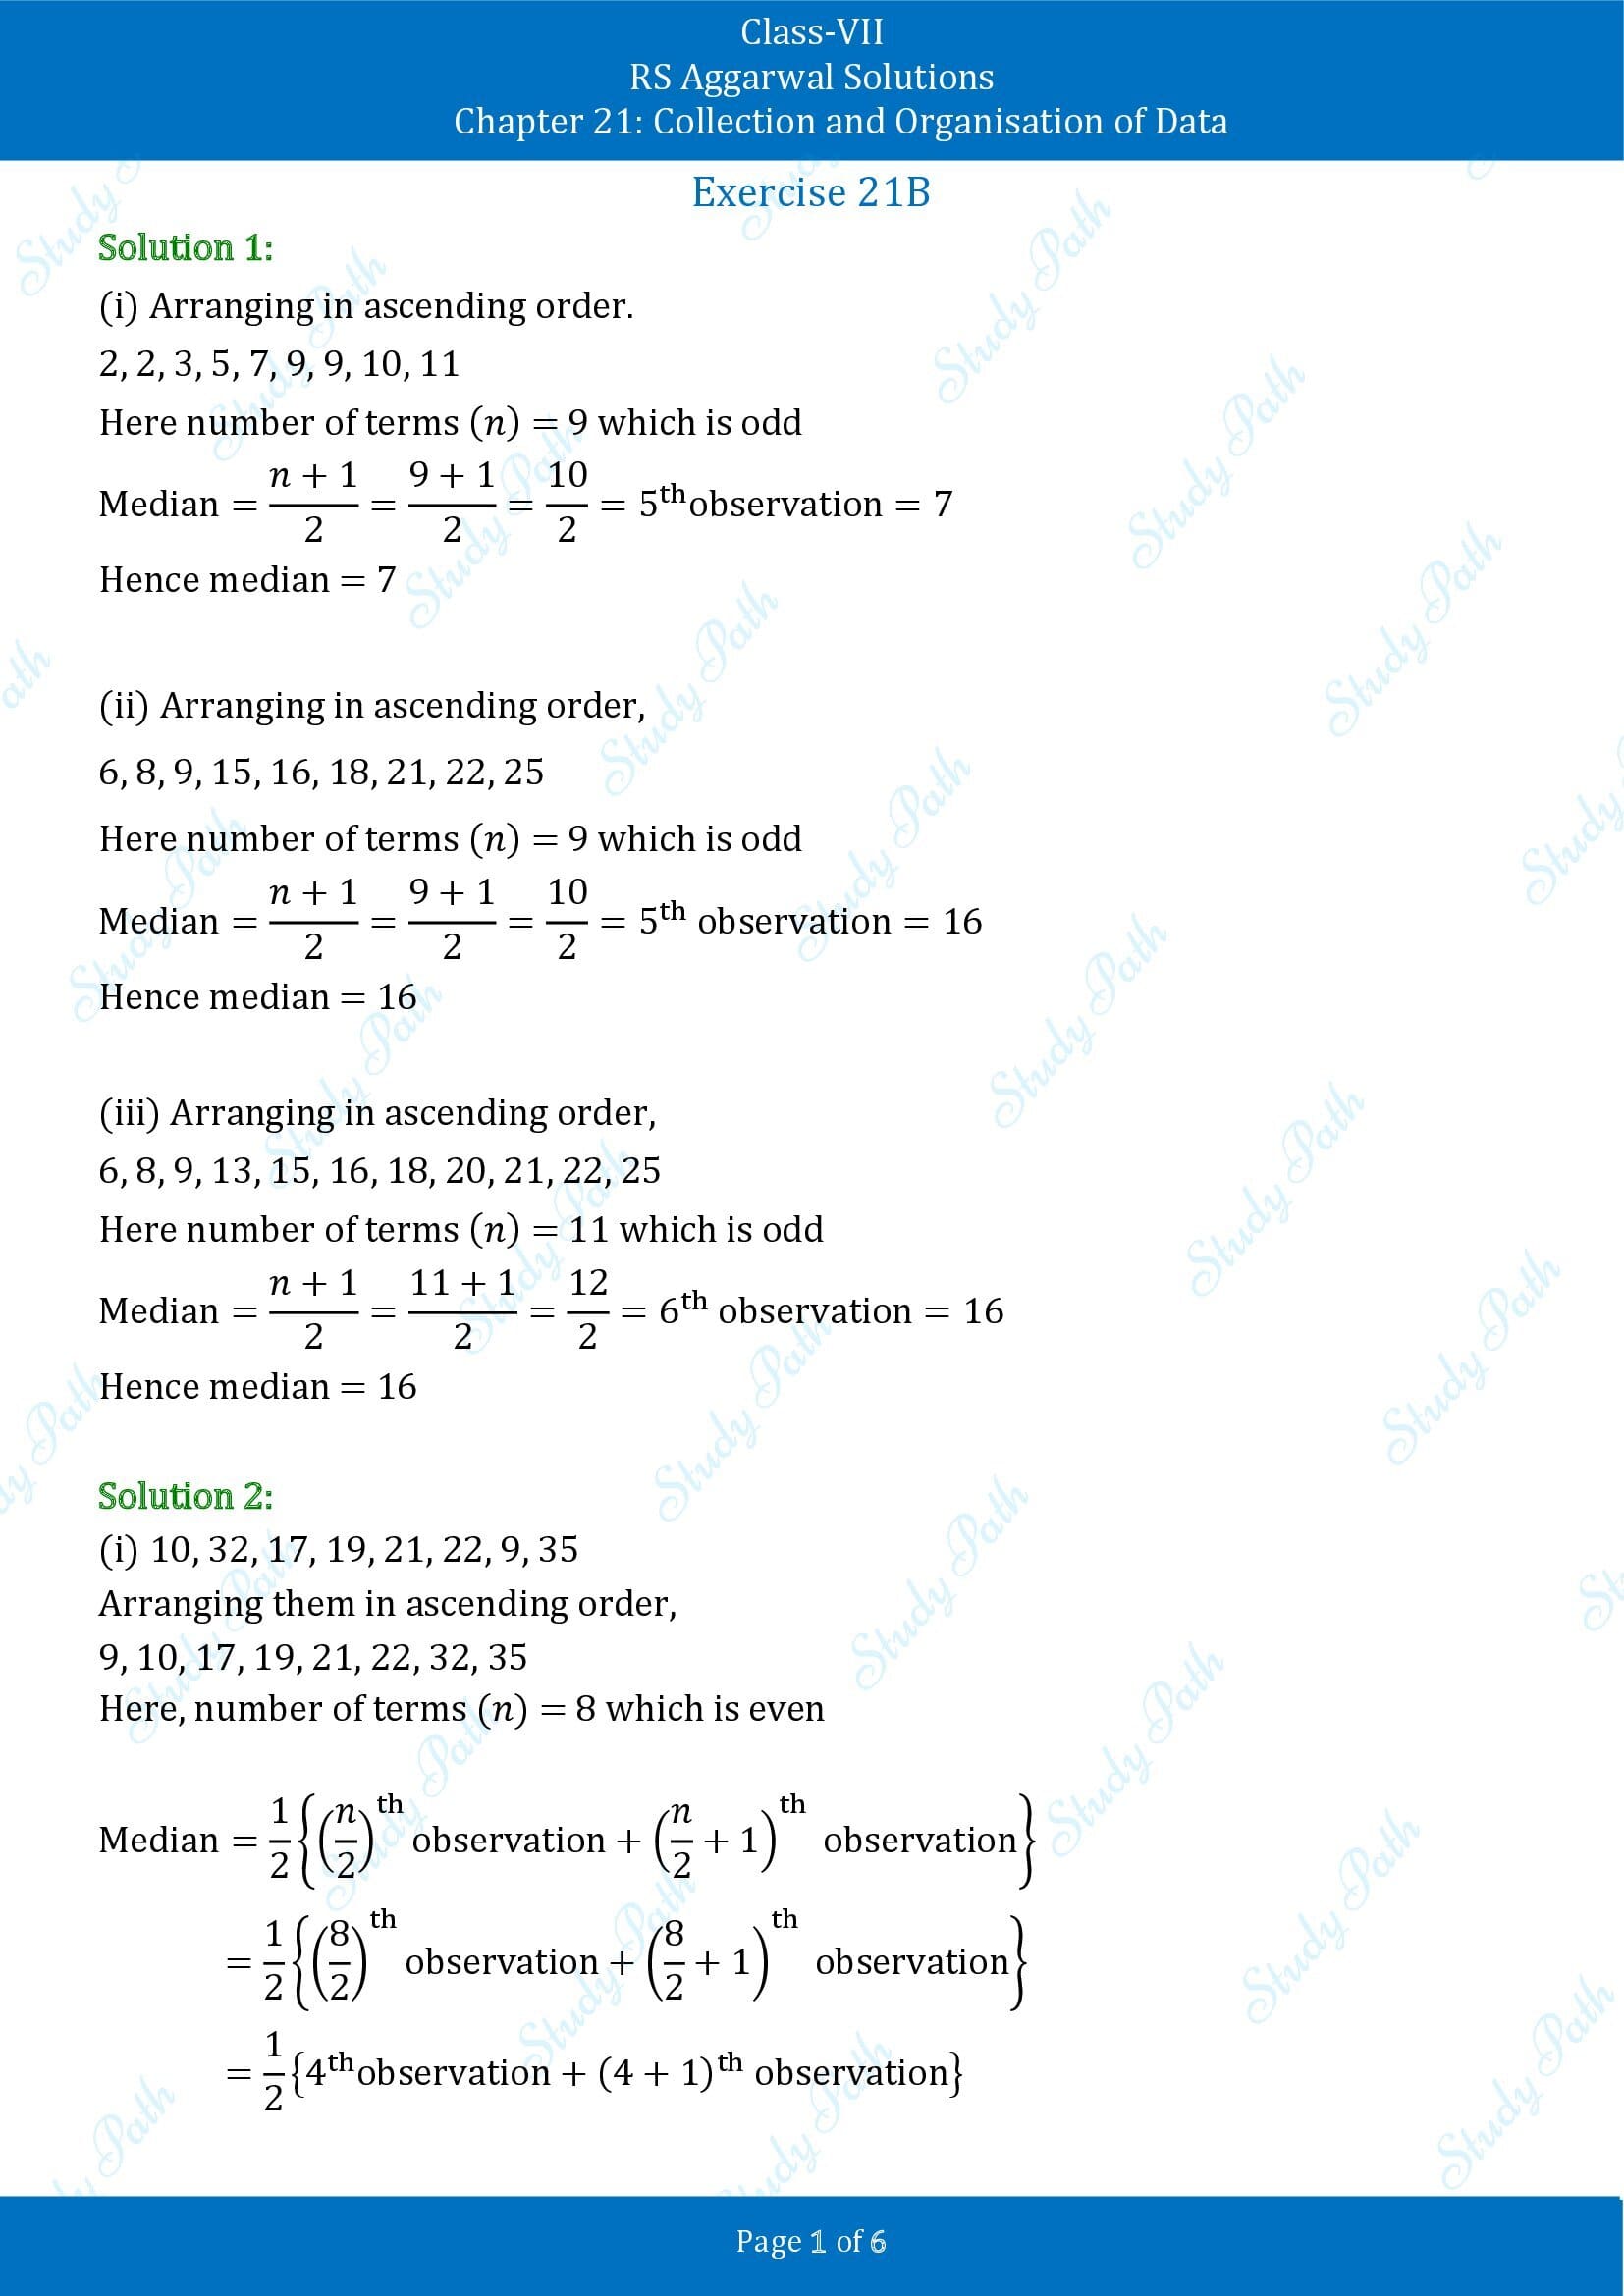 RS Aggarwal Solutions Class 7 Chapter 21 Collection and Organisation of Data Exercise 21B 00001